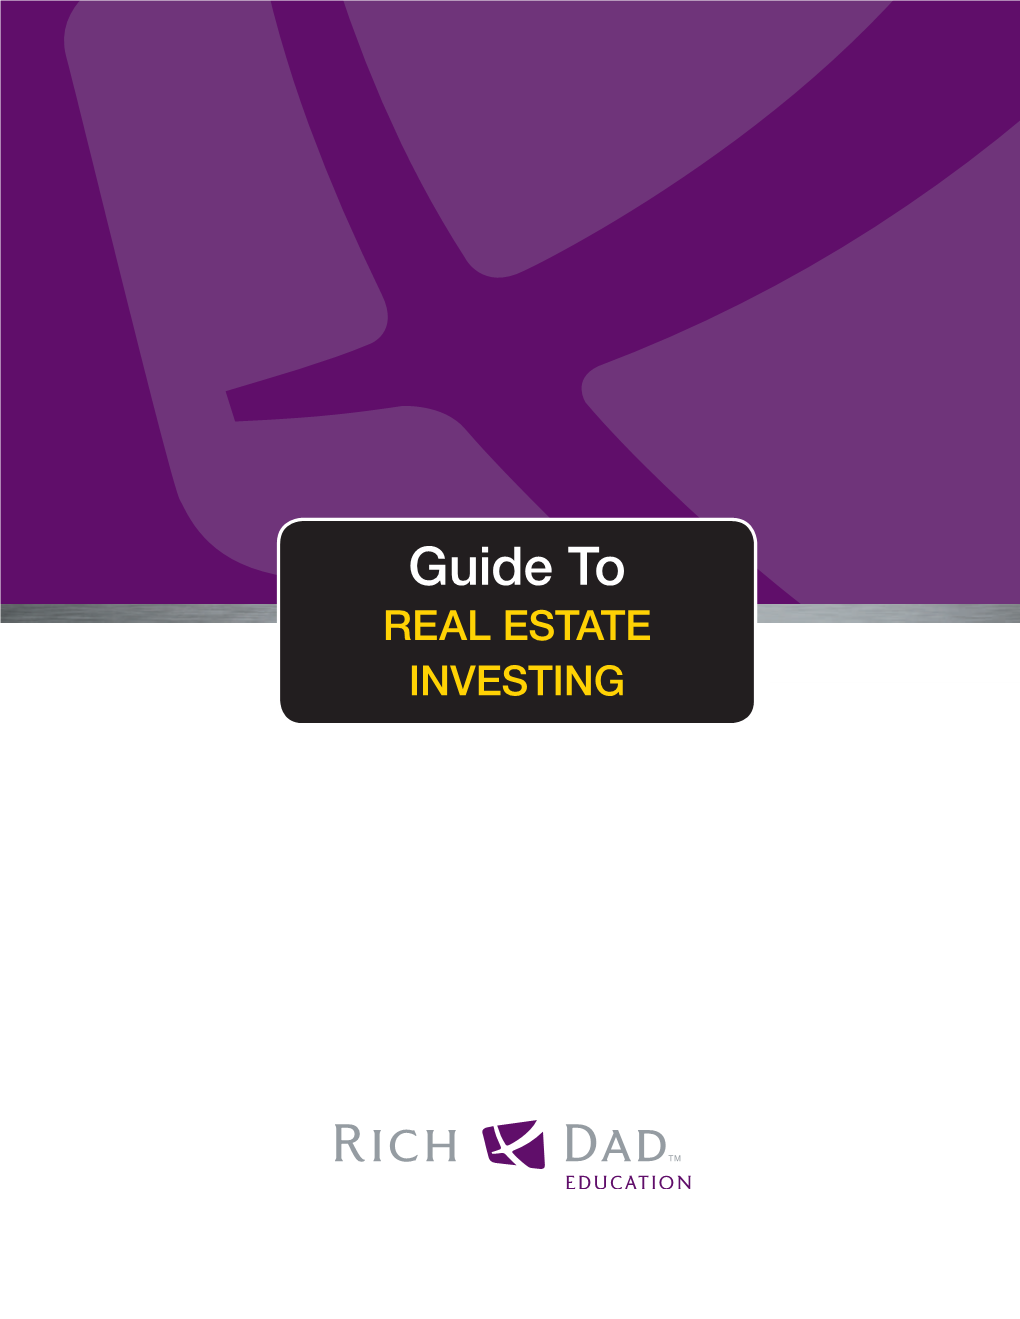 Guide to Real Estate Investing DISCLOSURE